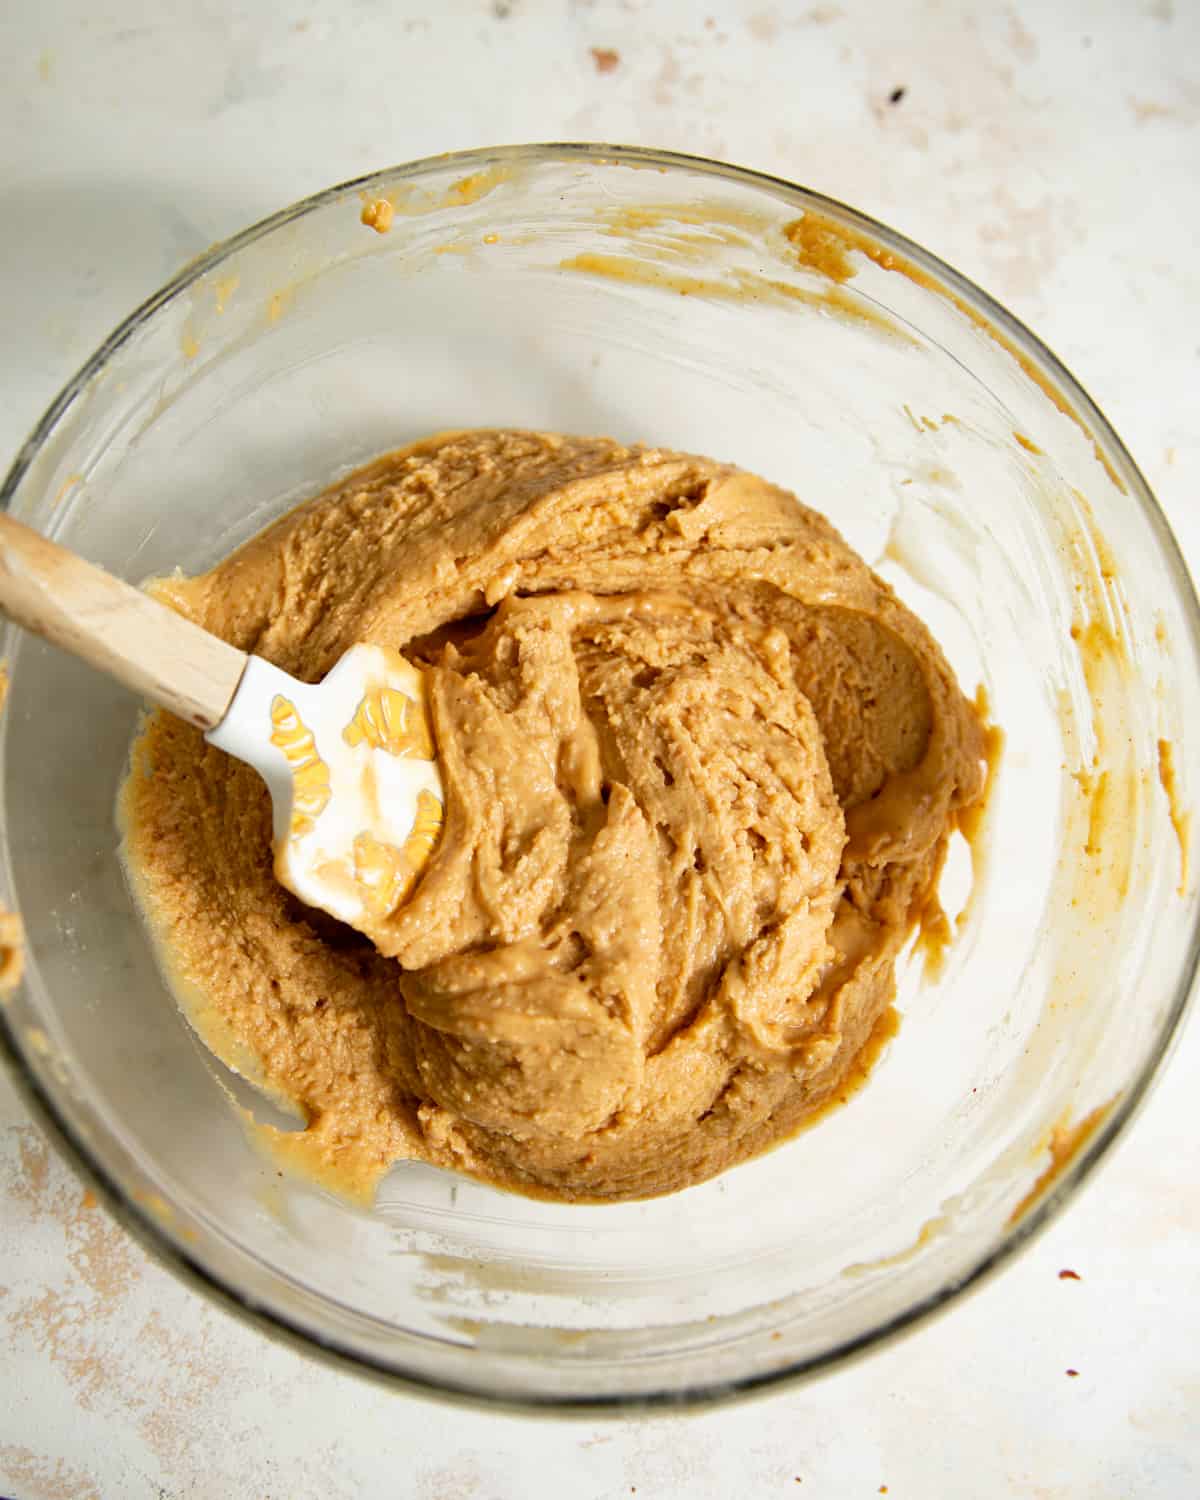 A spatula in a mixing bowl of peanut butter truffle filling.